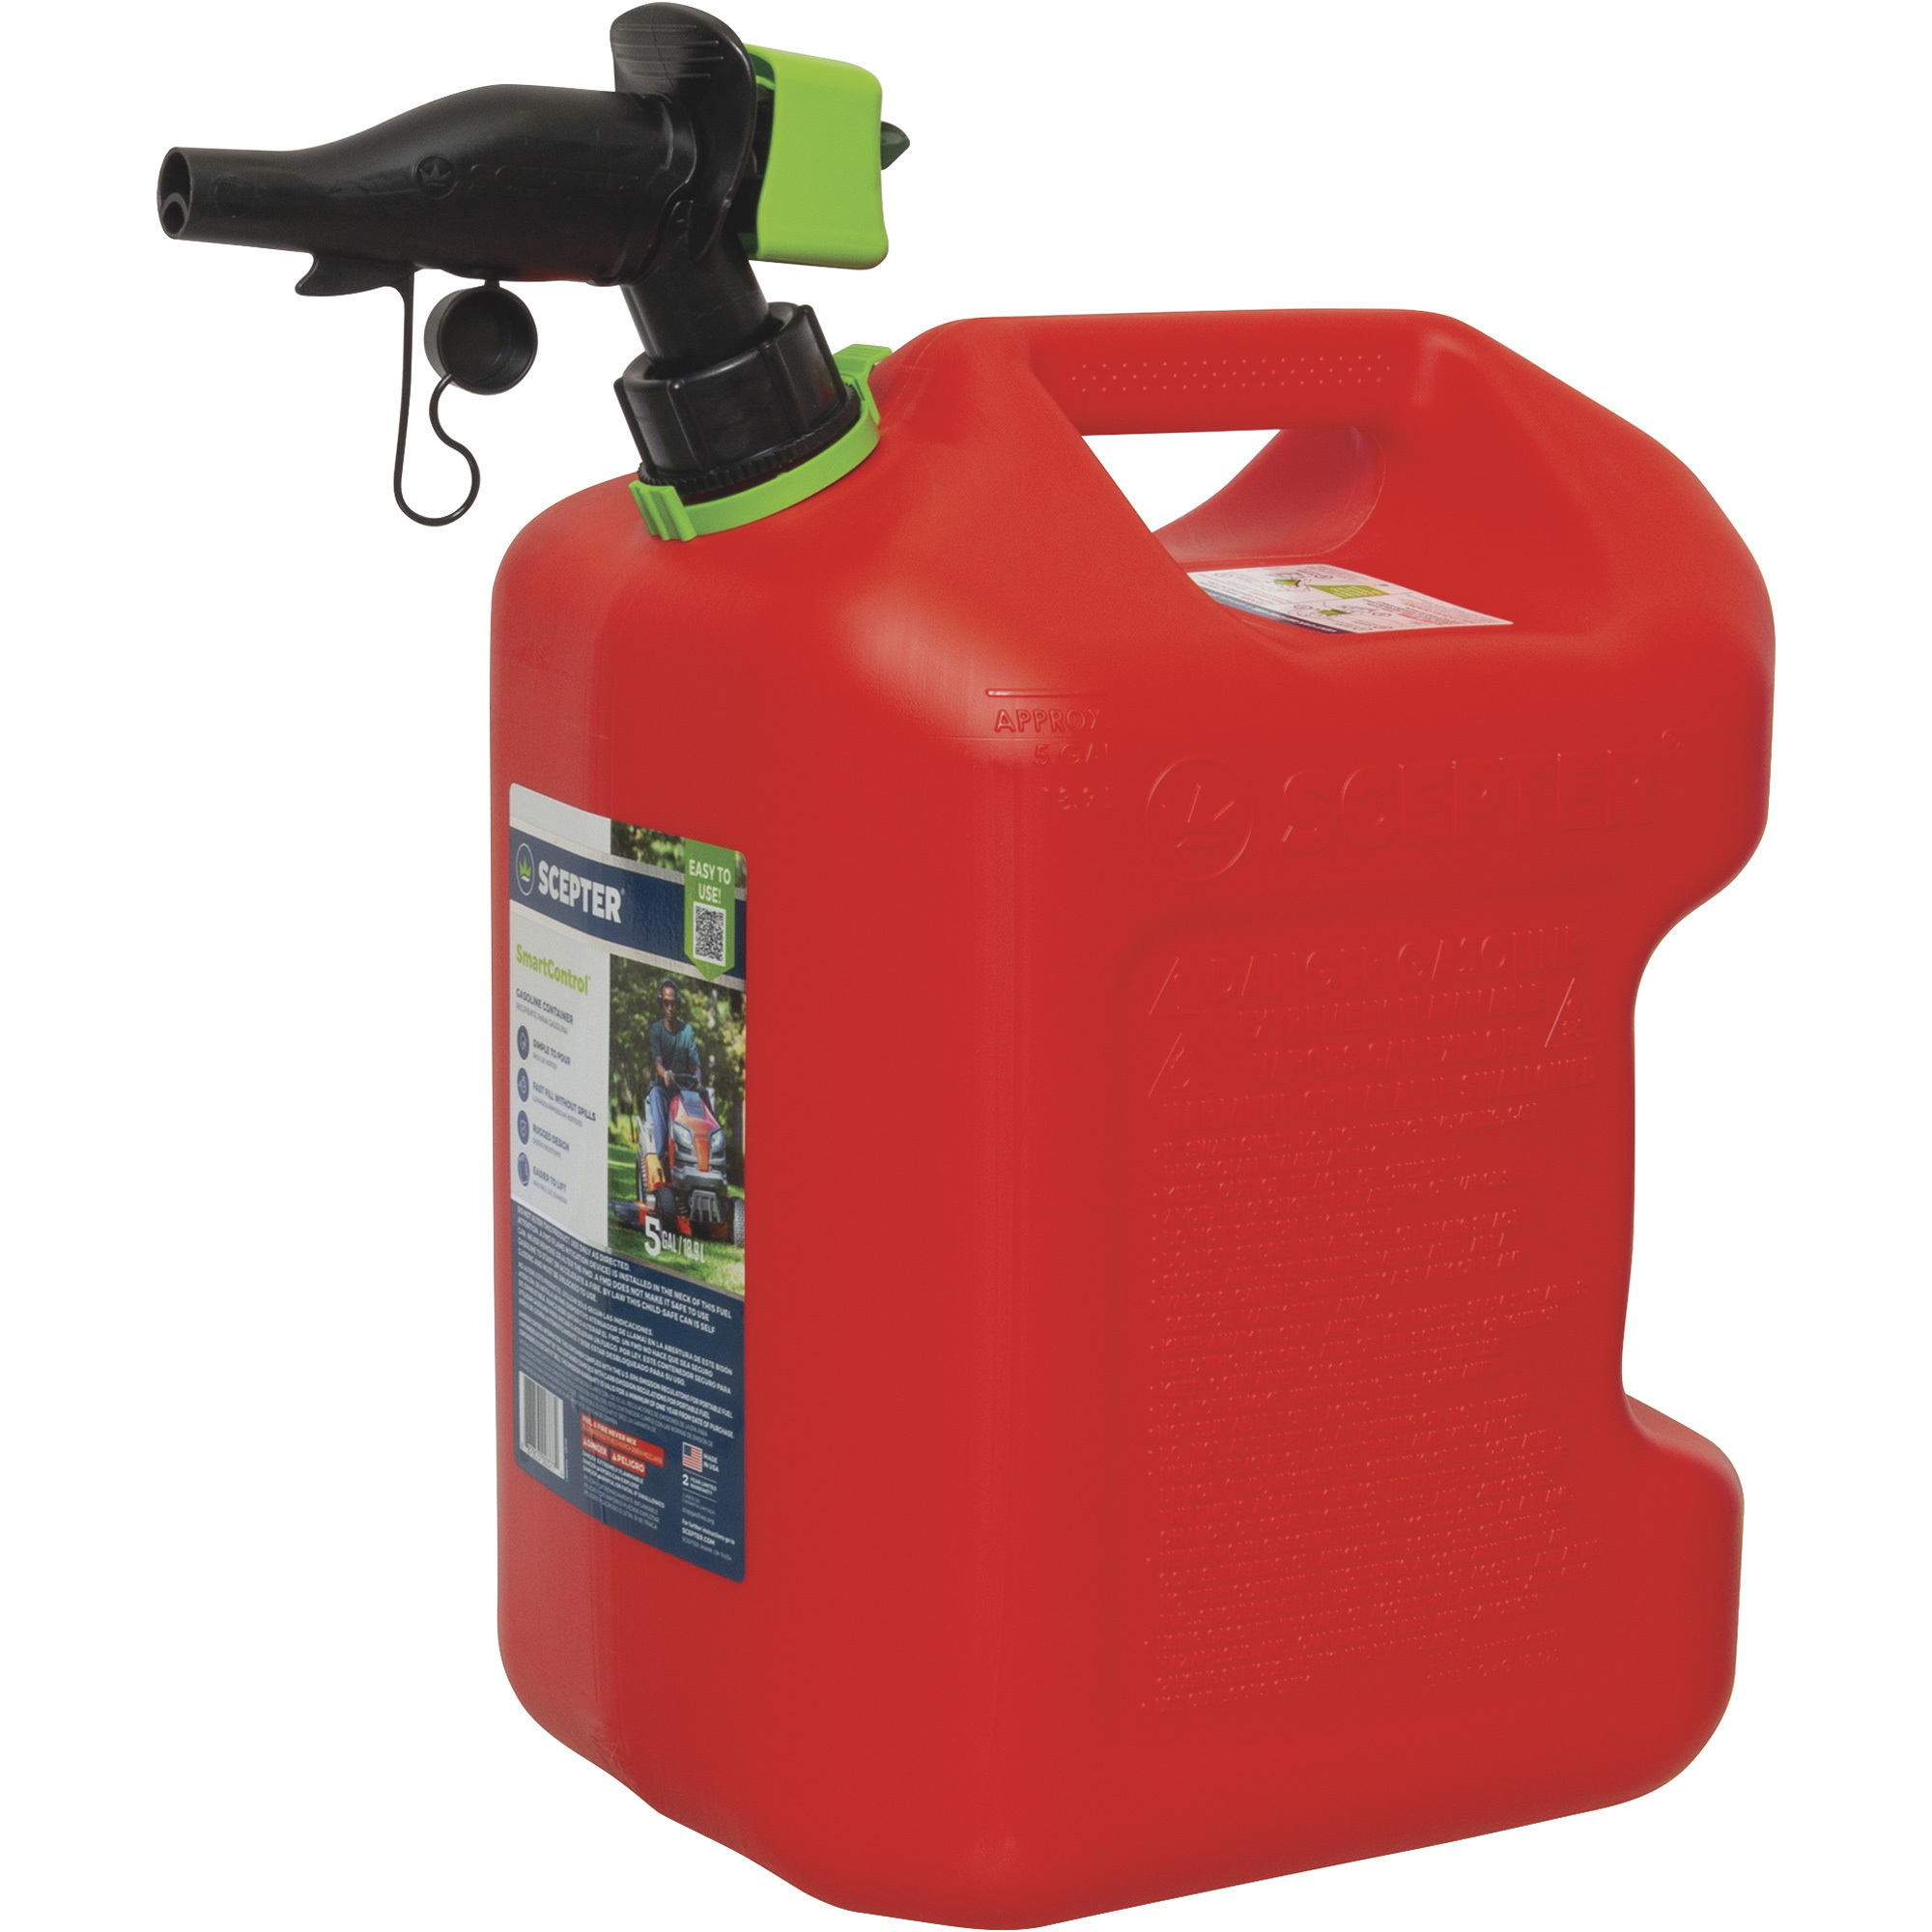 Scepter Gas Can with SmartControl Spout, 5 Gallons, Red, Model FSCG571